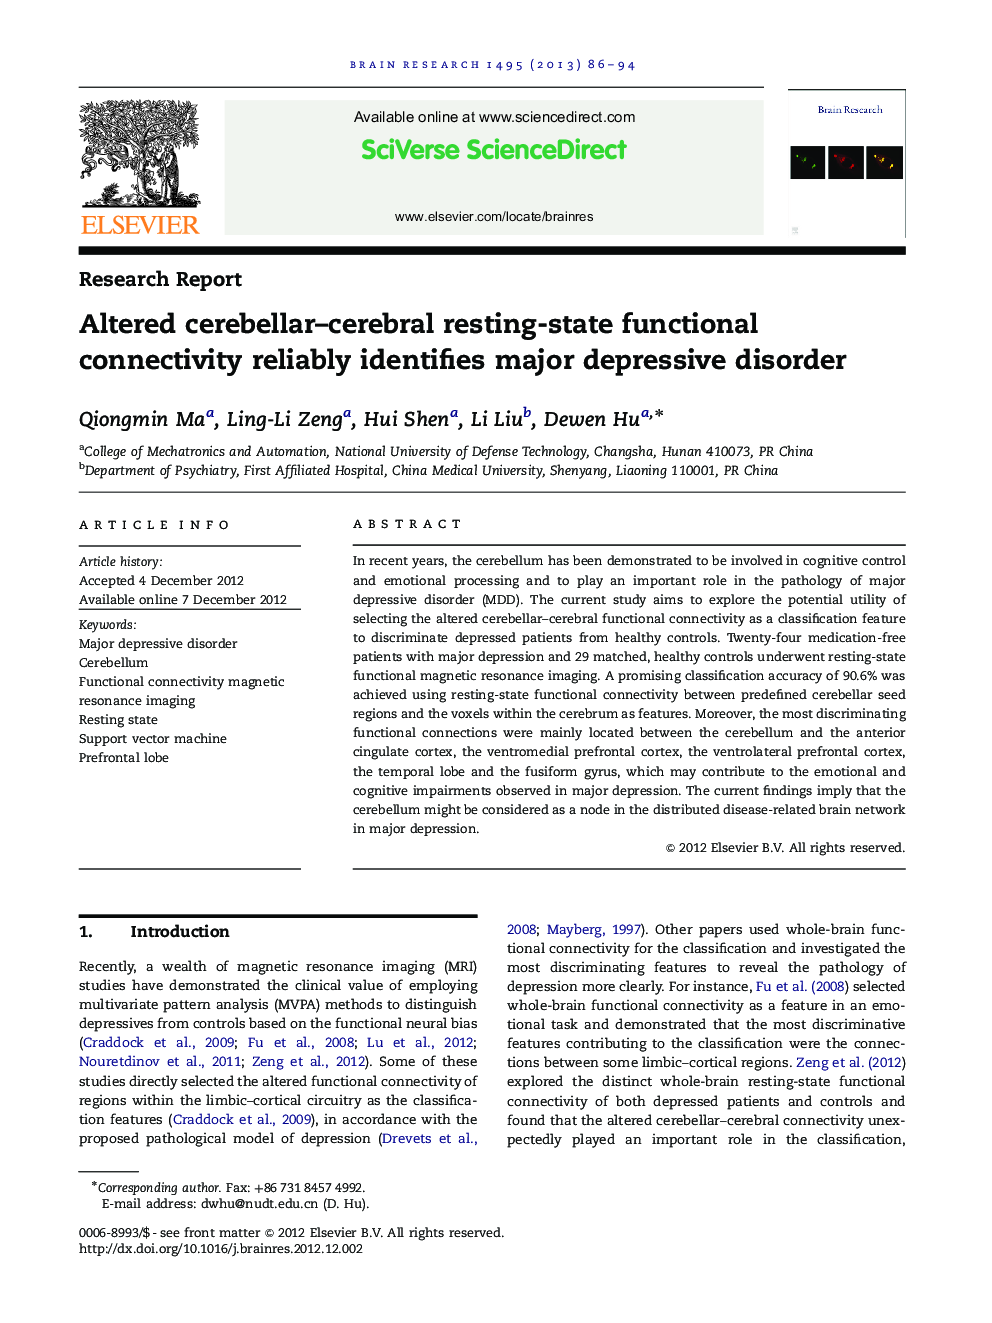 Research ReportAltered cerebellar-cerebral resting-state functional connectivity reliably identifies major depressive disorder